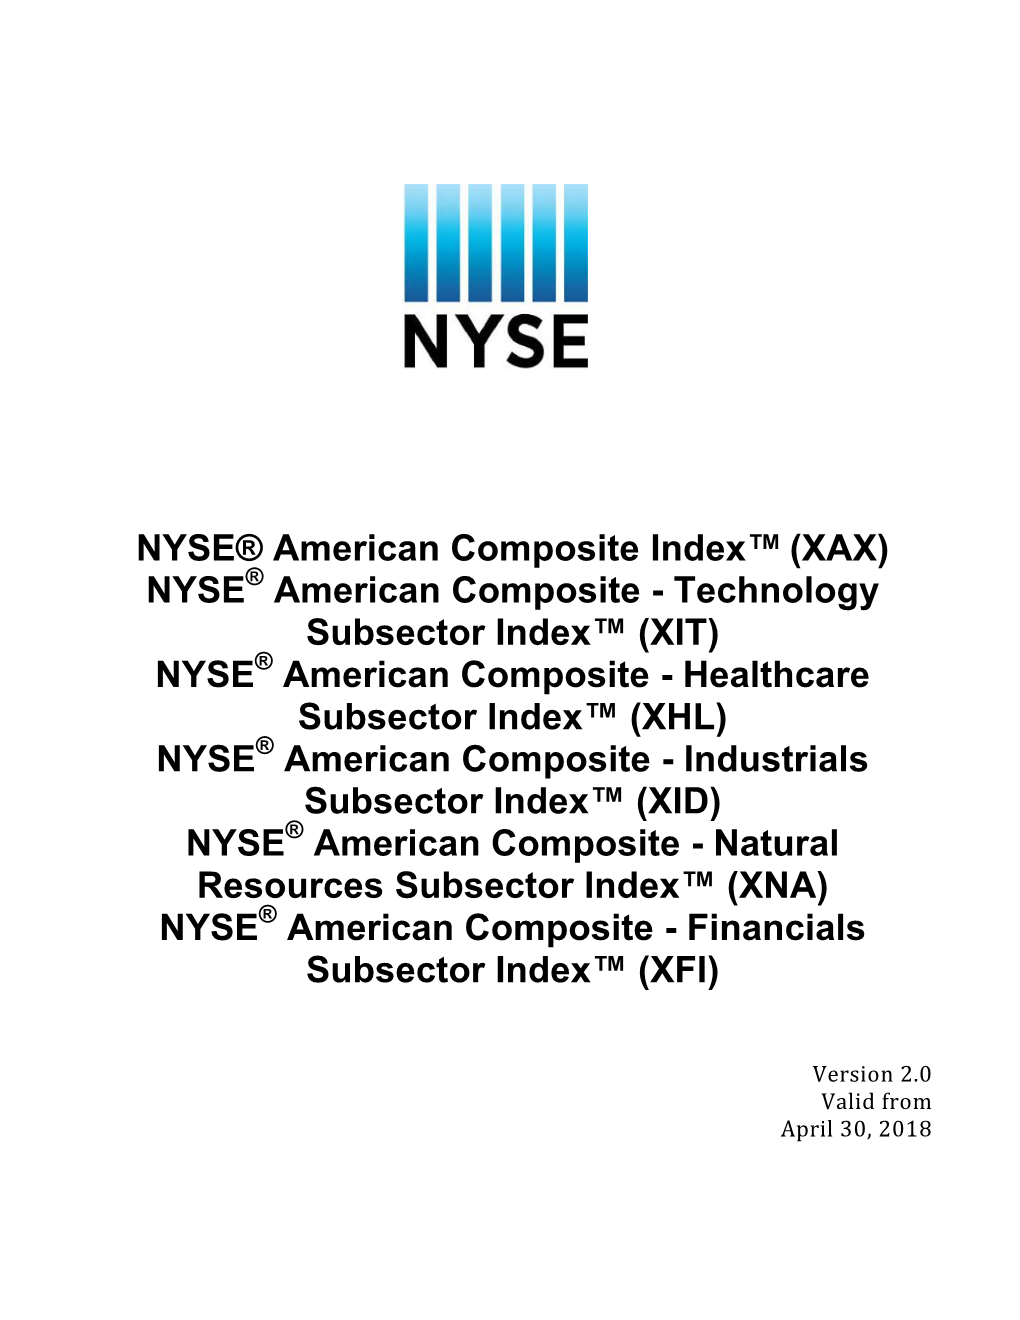 (XAX) NYSE American Composite